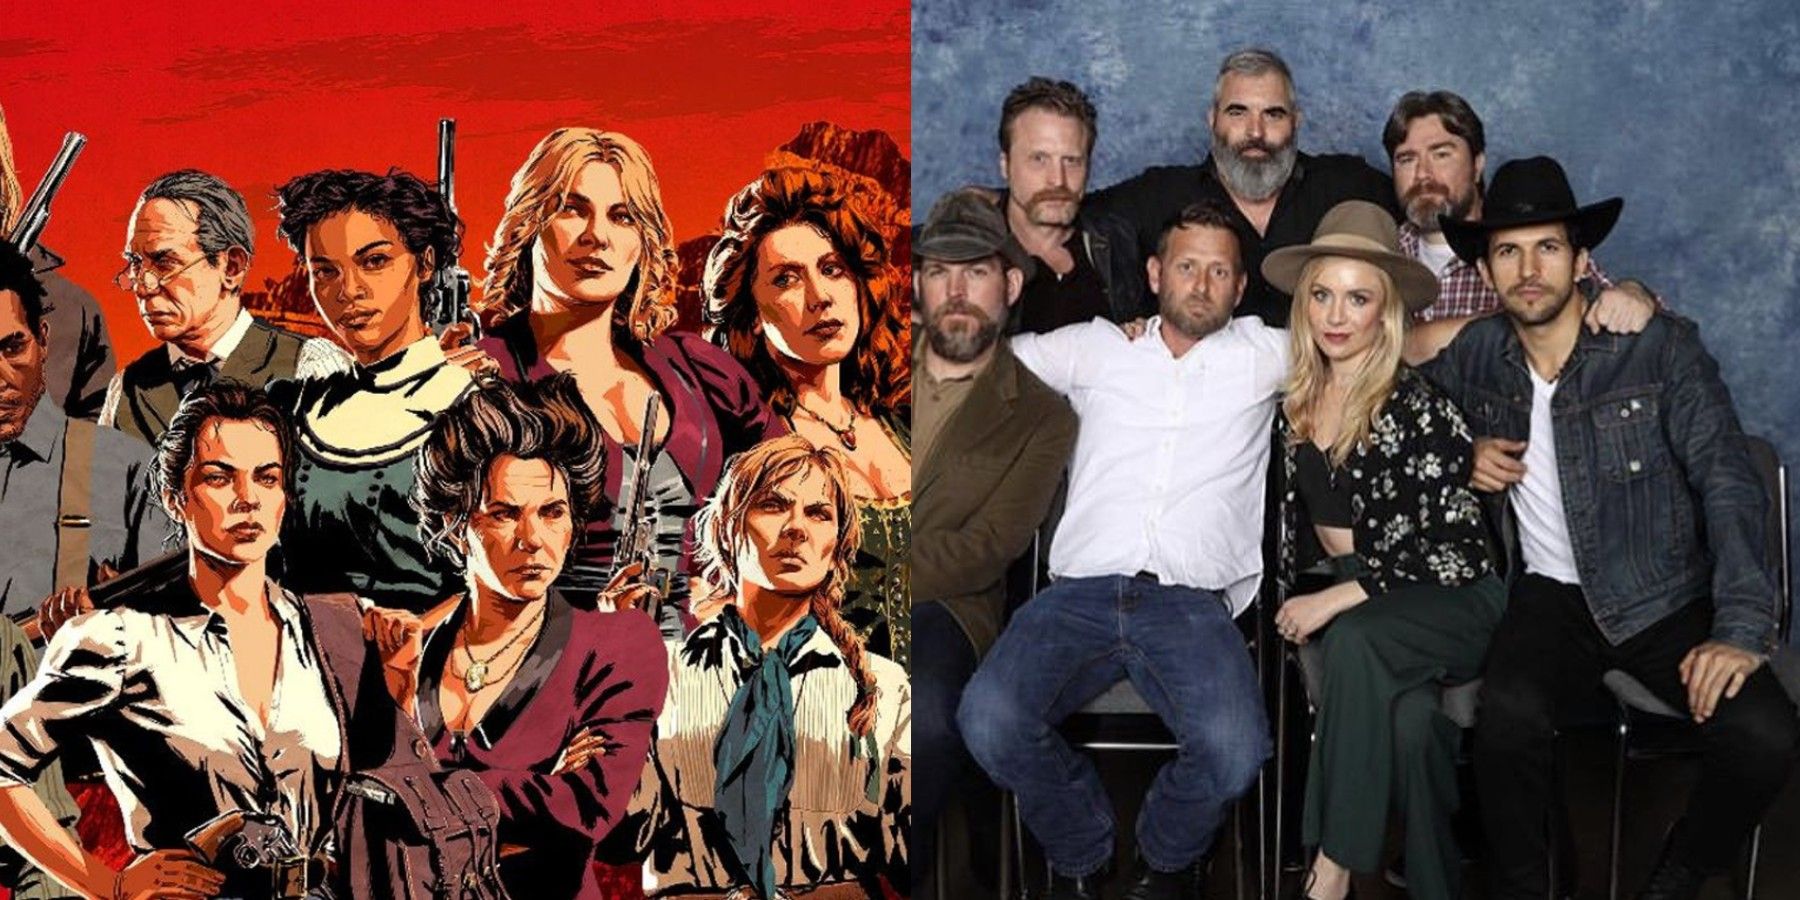 RDR 2 cast and gang